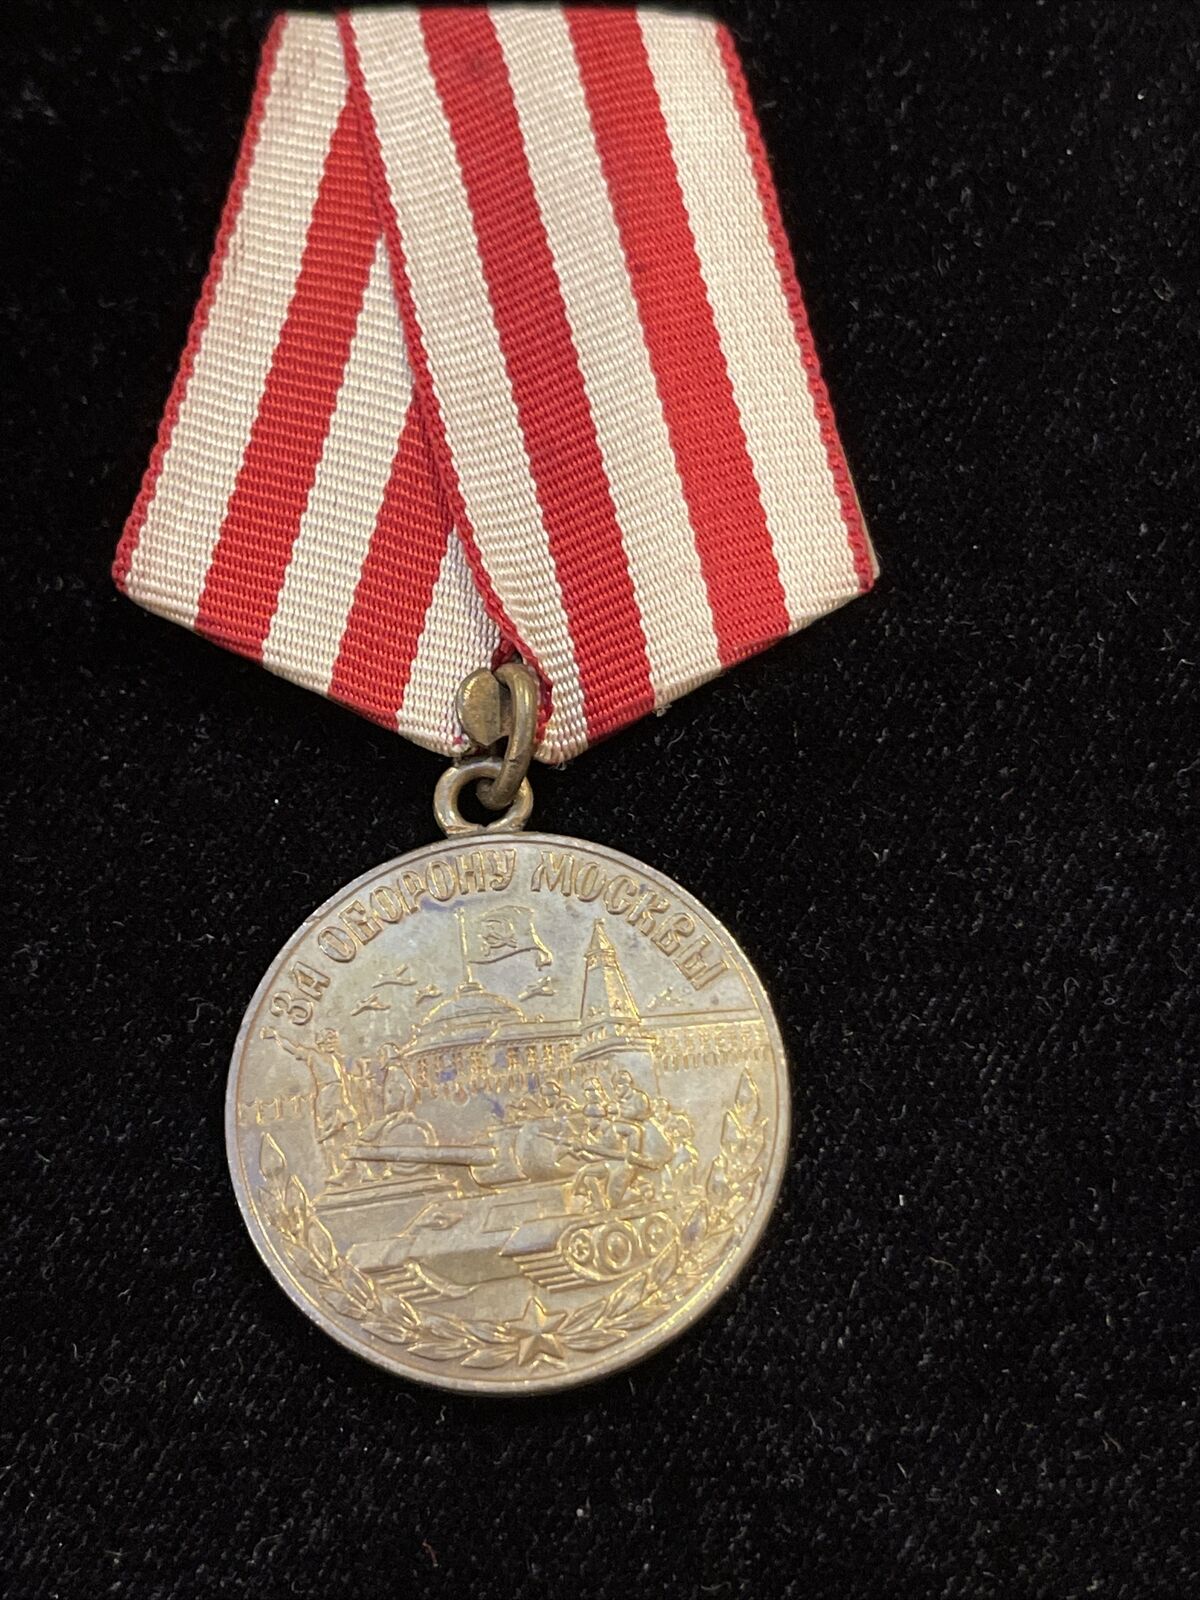 SOVIET UNION MEDAL FOR DEFENDING MOSCOW IN GREAT PATRIOTIC WAR 1941-1945.